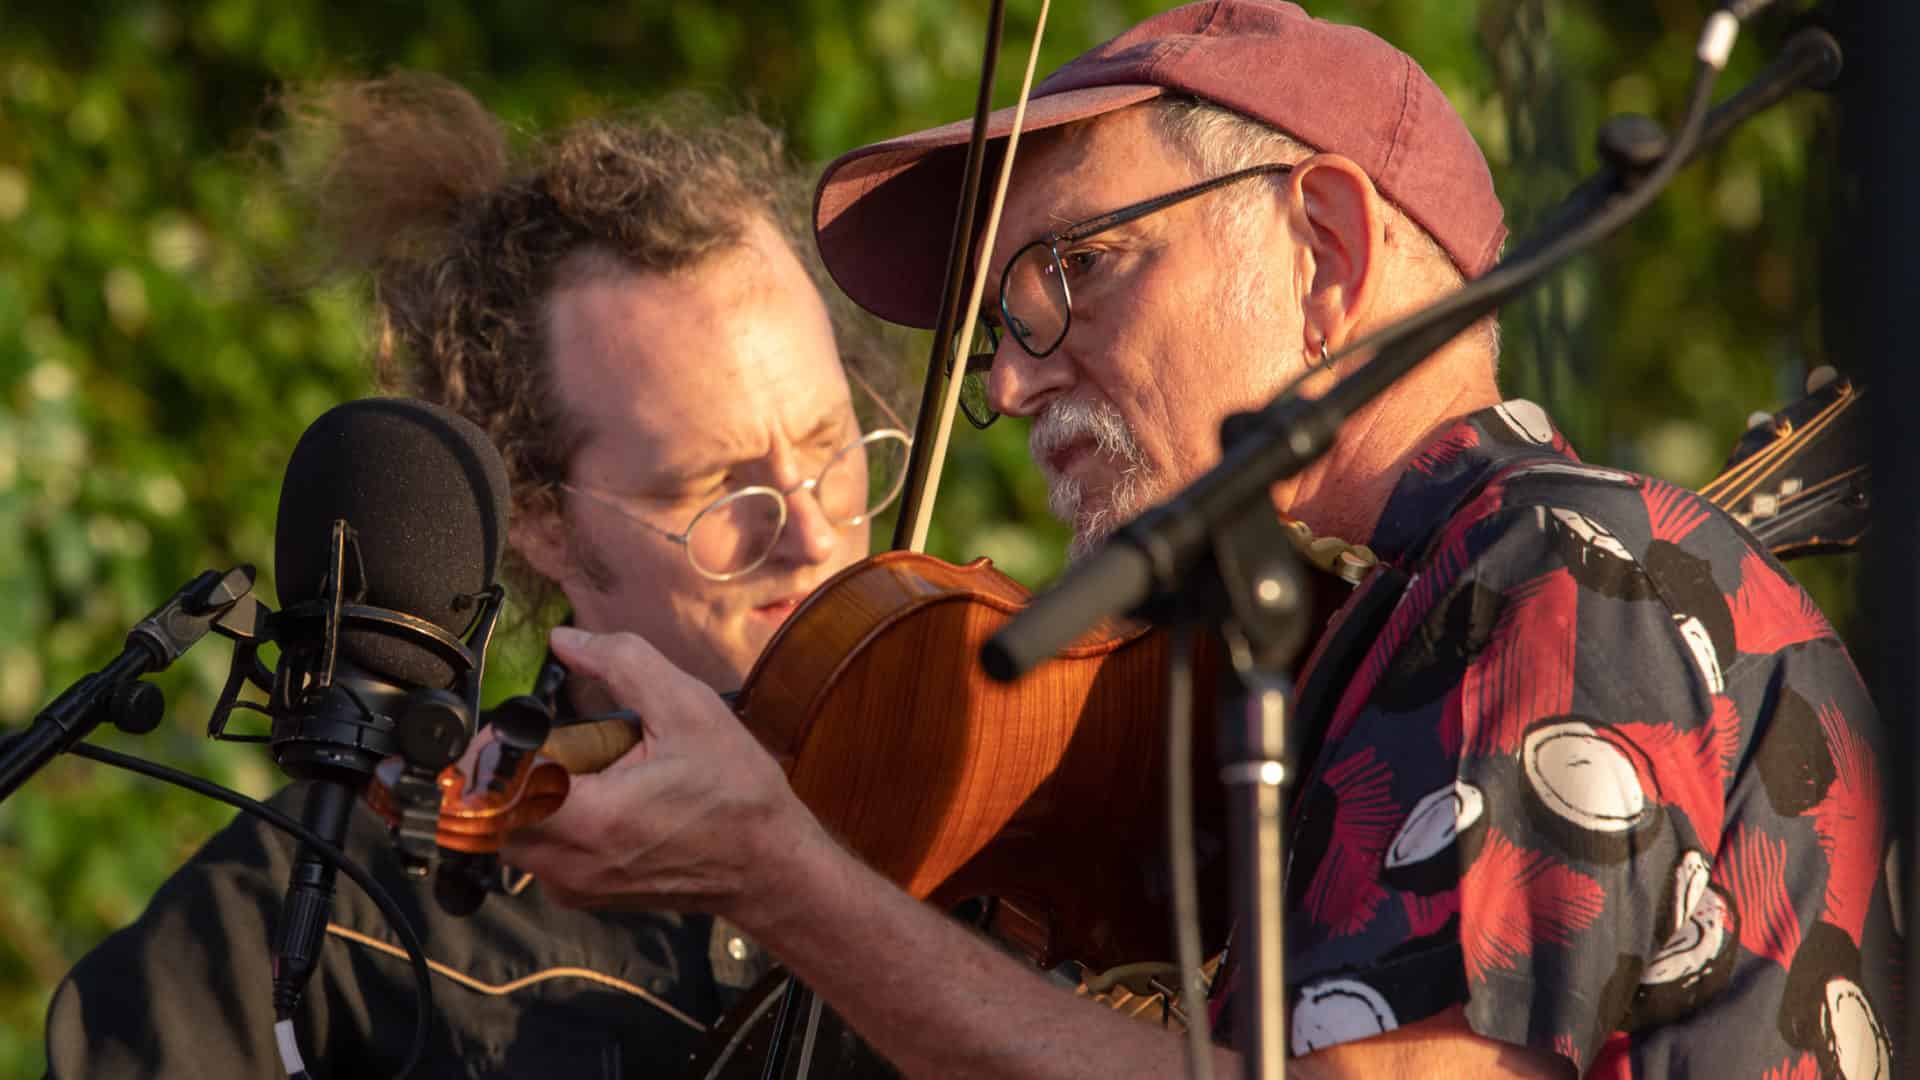 Bruce Molsky on fiddle and Michael Daves on guitar perform on a summer day. Press photo courtesy of the artists